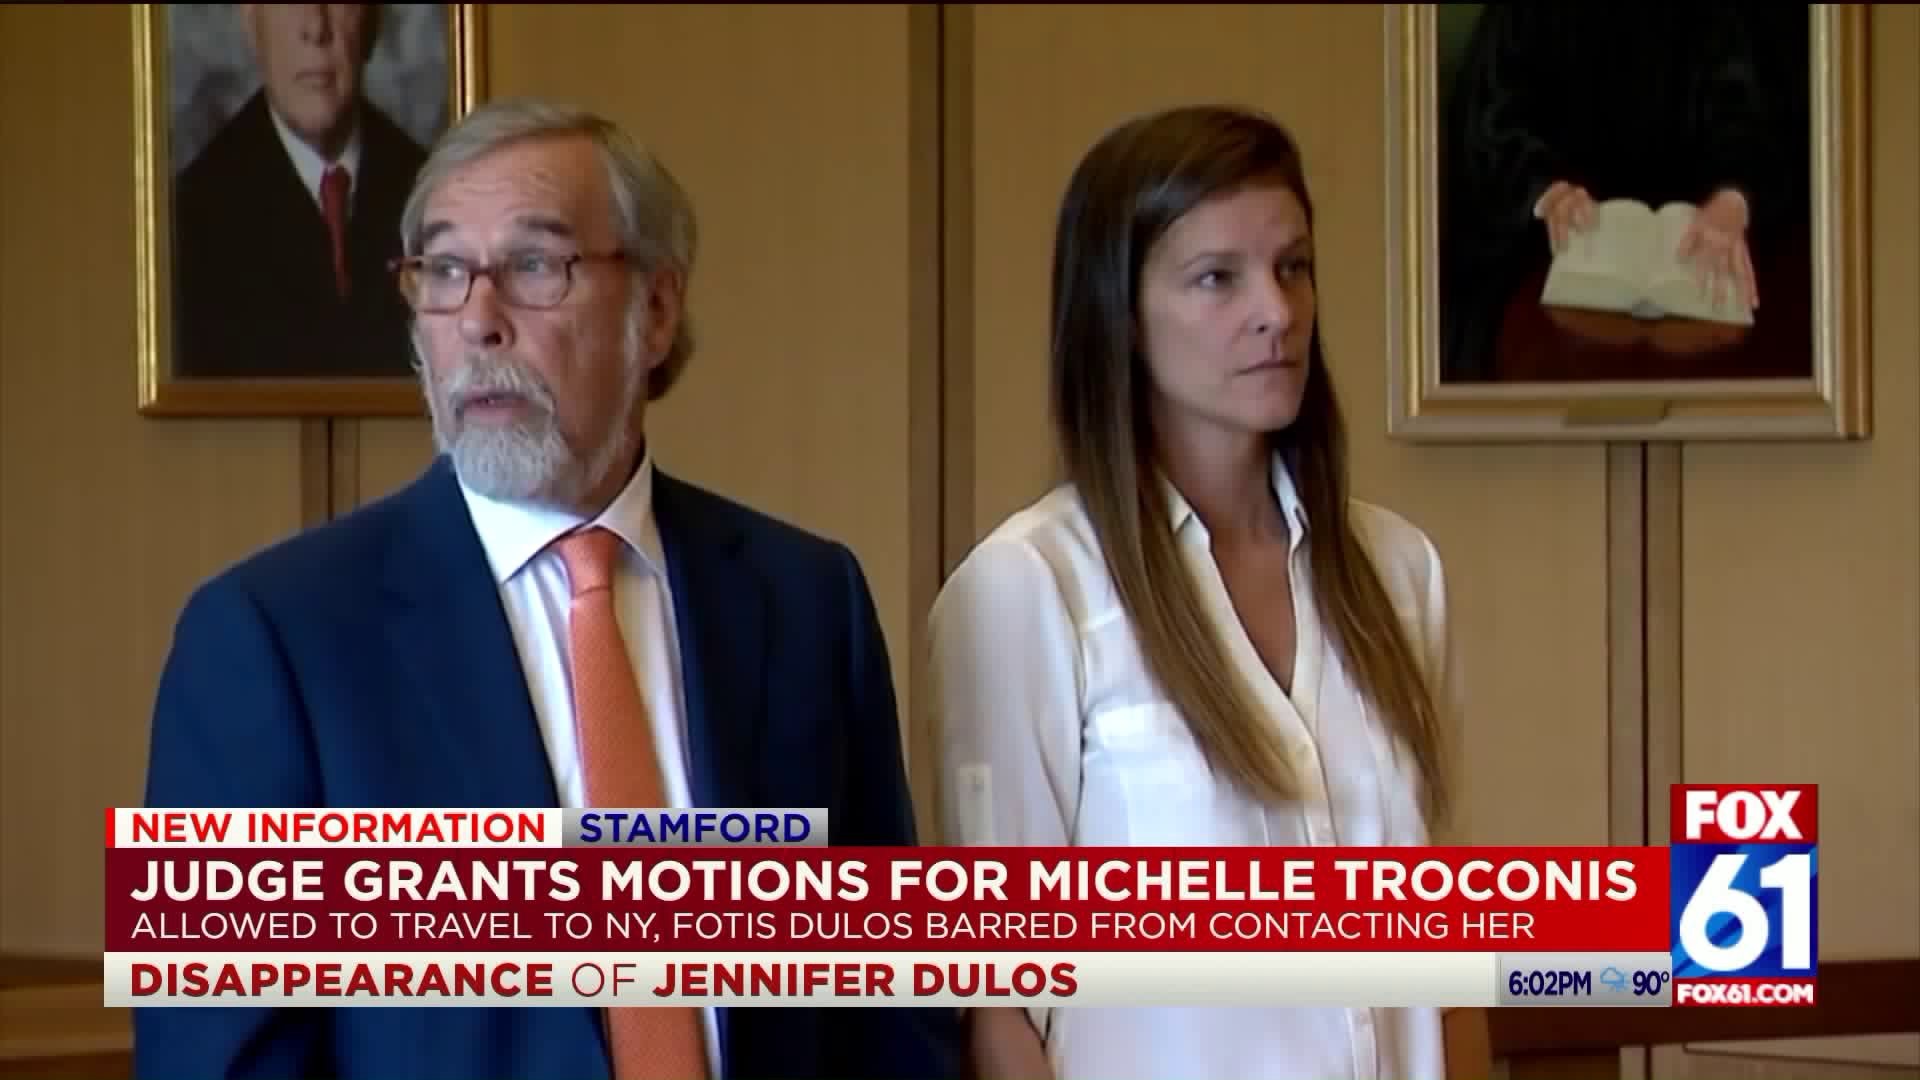 Michelle Troconis allowed to travel, judge says